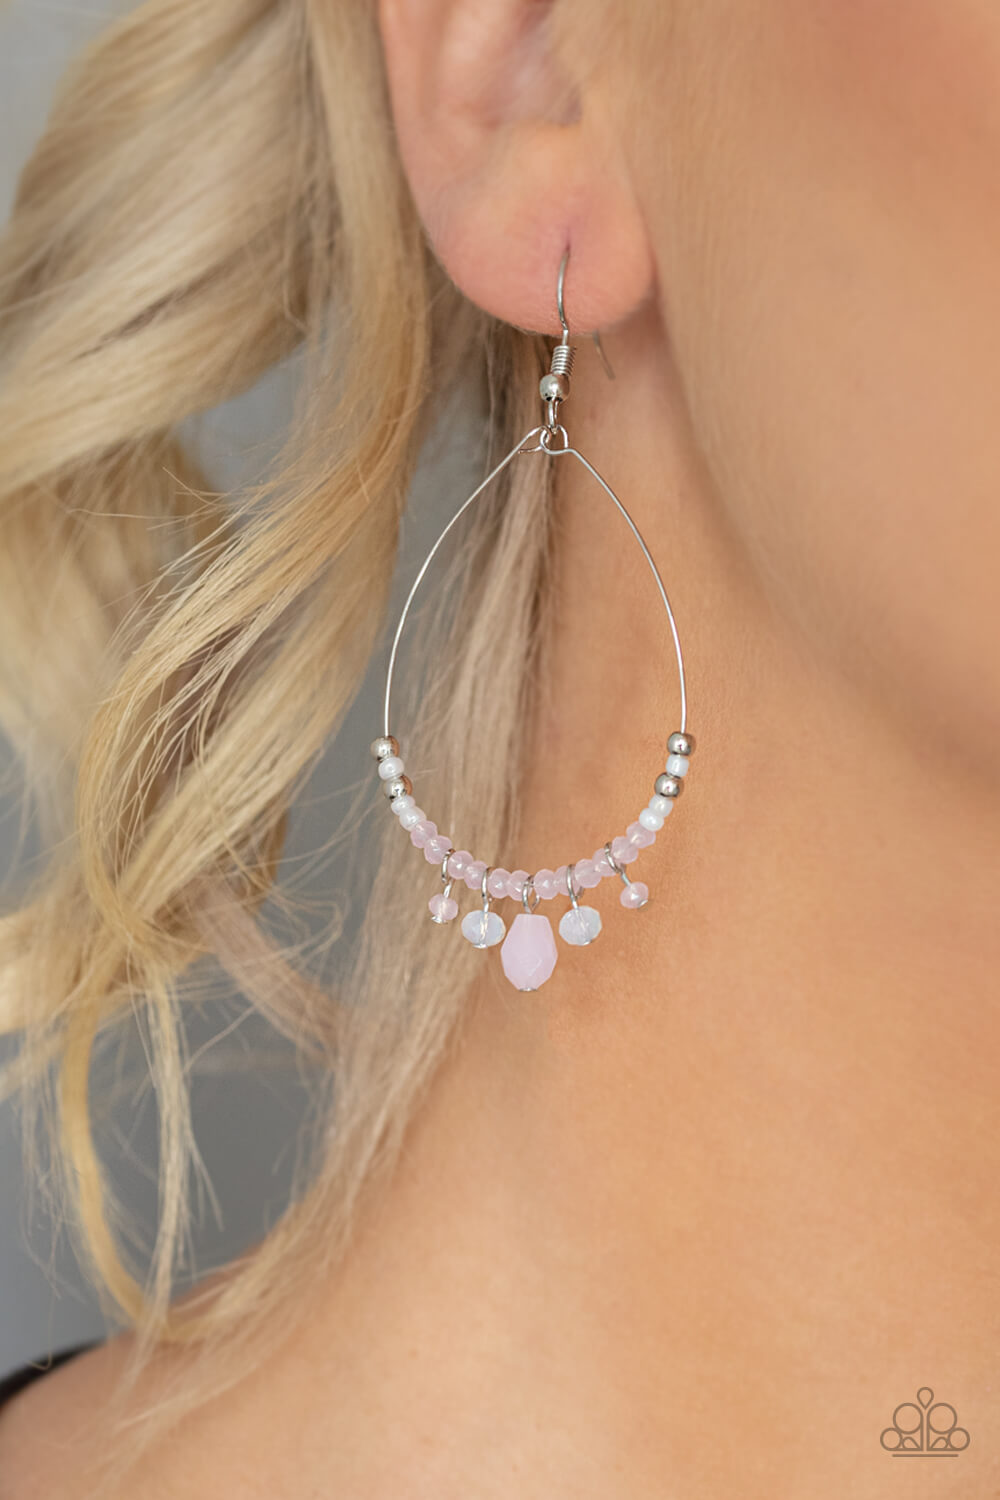 Exquisitely Ethereal - Pink Earrings - Princess Glam Shop